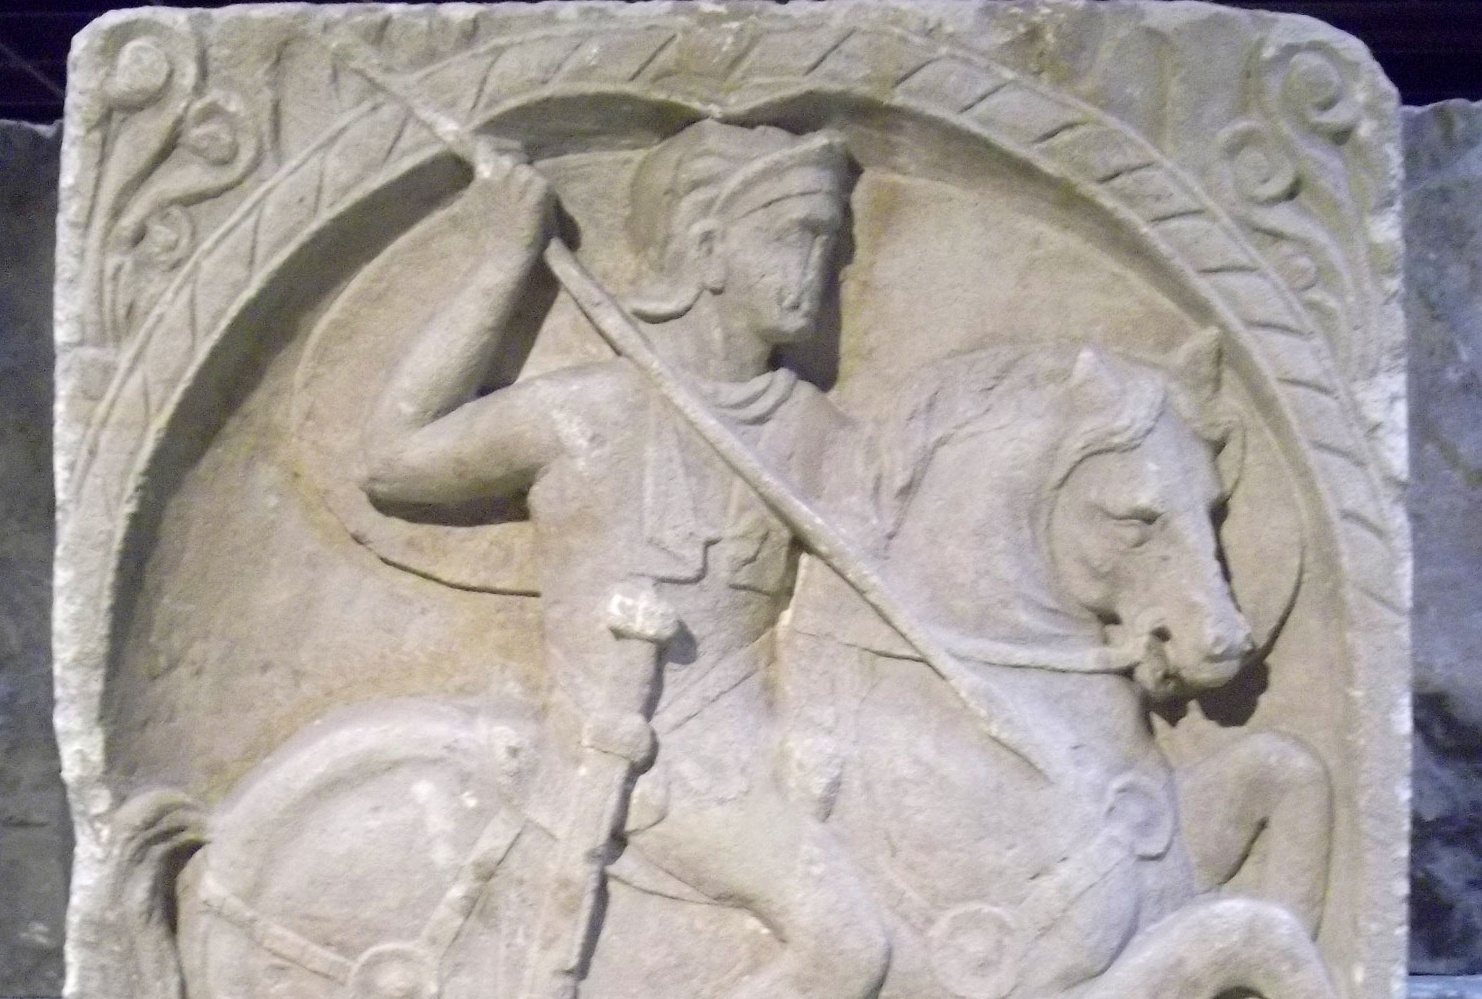 The gravestone of a Roman horseman in the Roman-Germanic Museum in Cologne, dating: 2nd half of the 1st century AD.